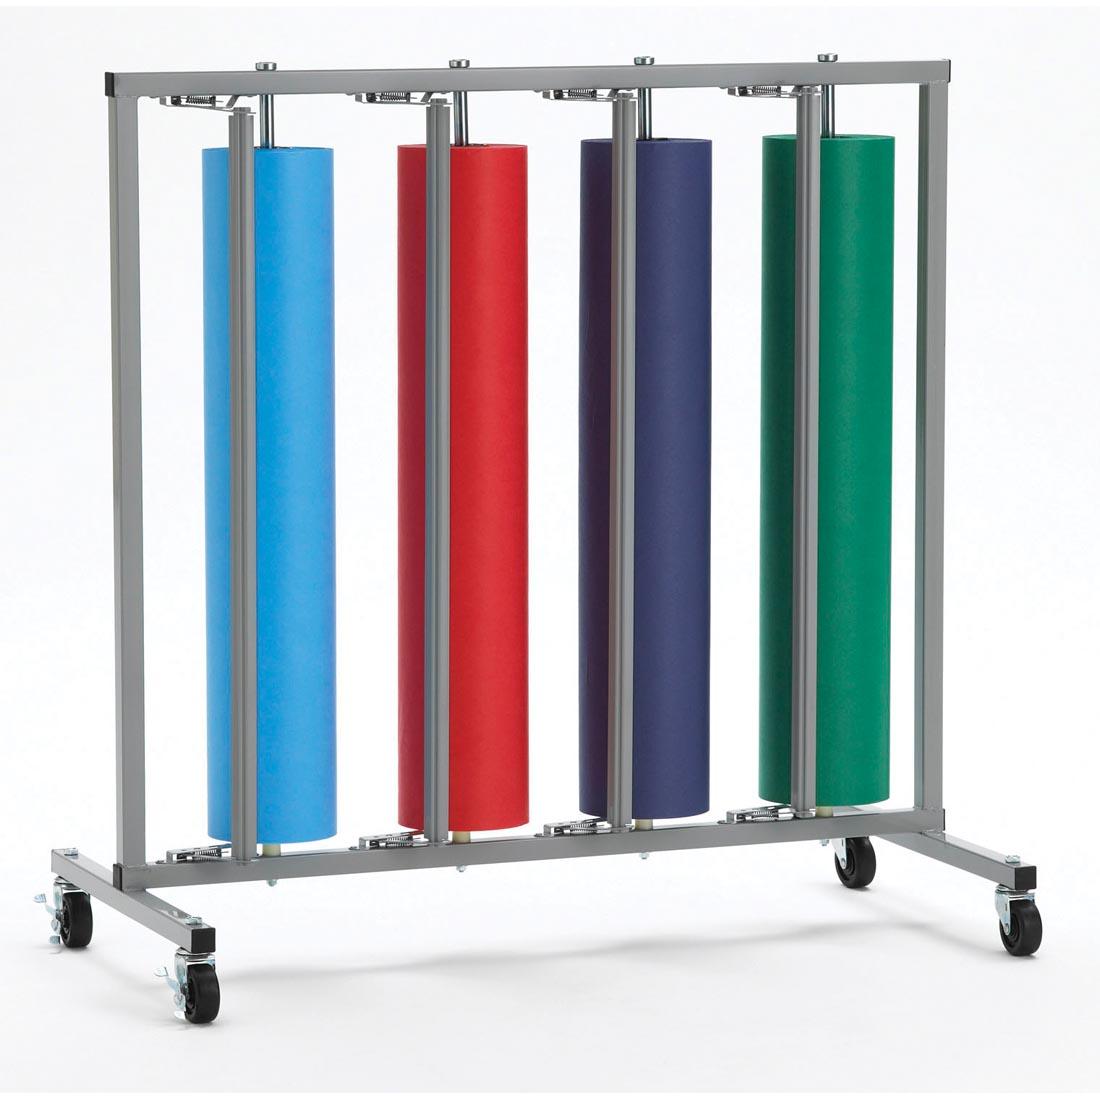 4-Roll Paper Rack Shown Loaded With Paper Rolls